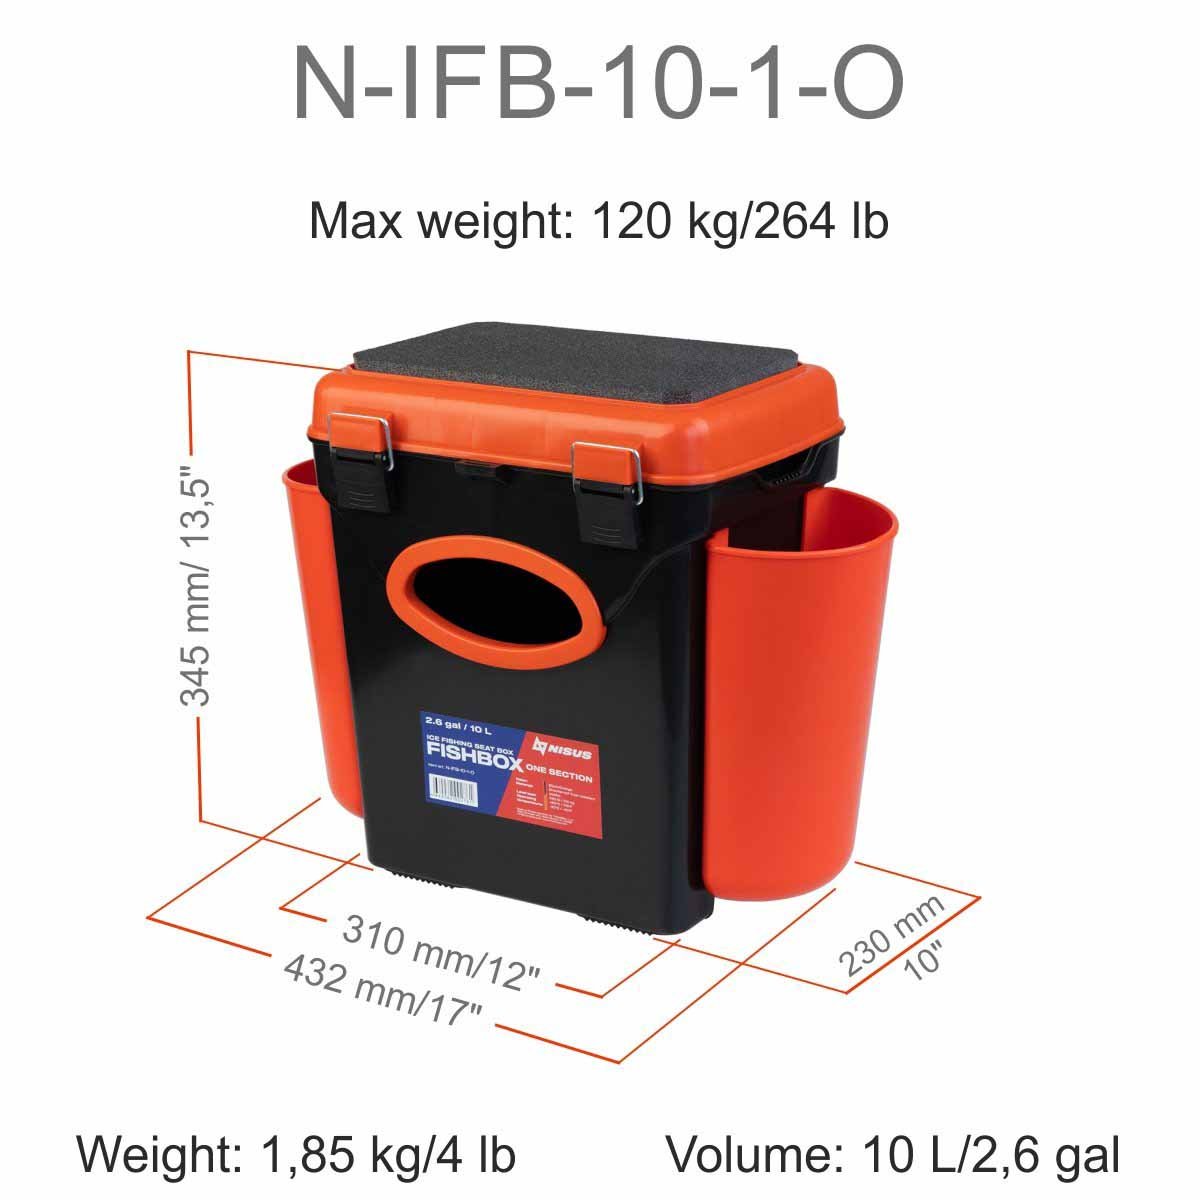 FishBox 10 liter Box for Ice Fishing with Seat could carry up to 264 pounds, it is 13.5 inches high, 17 inches long and 12 inches wide, weighing 4 lbs